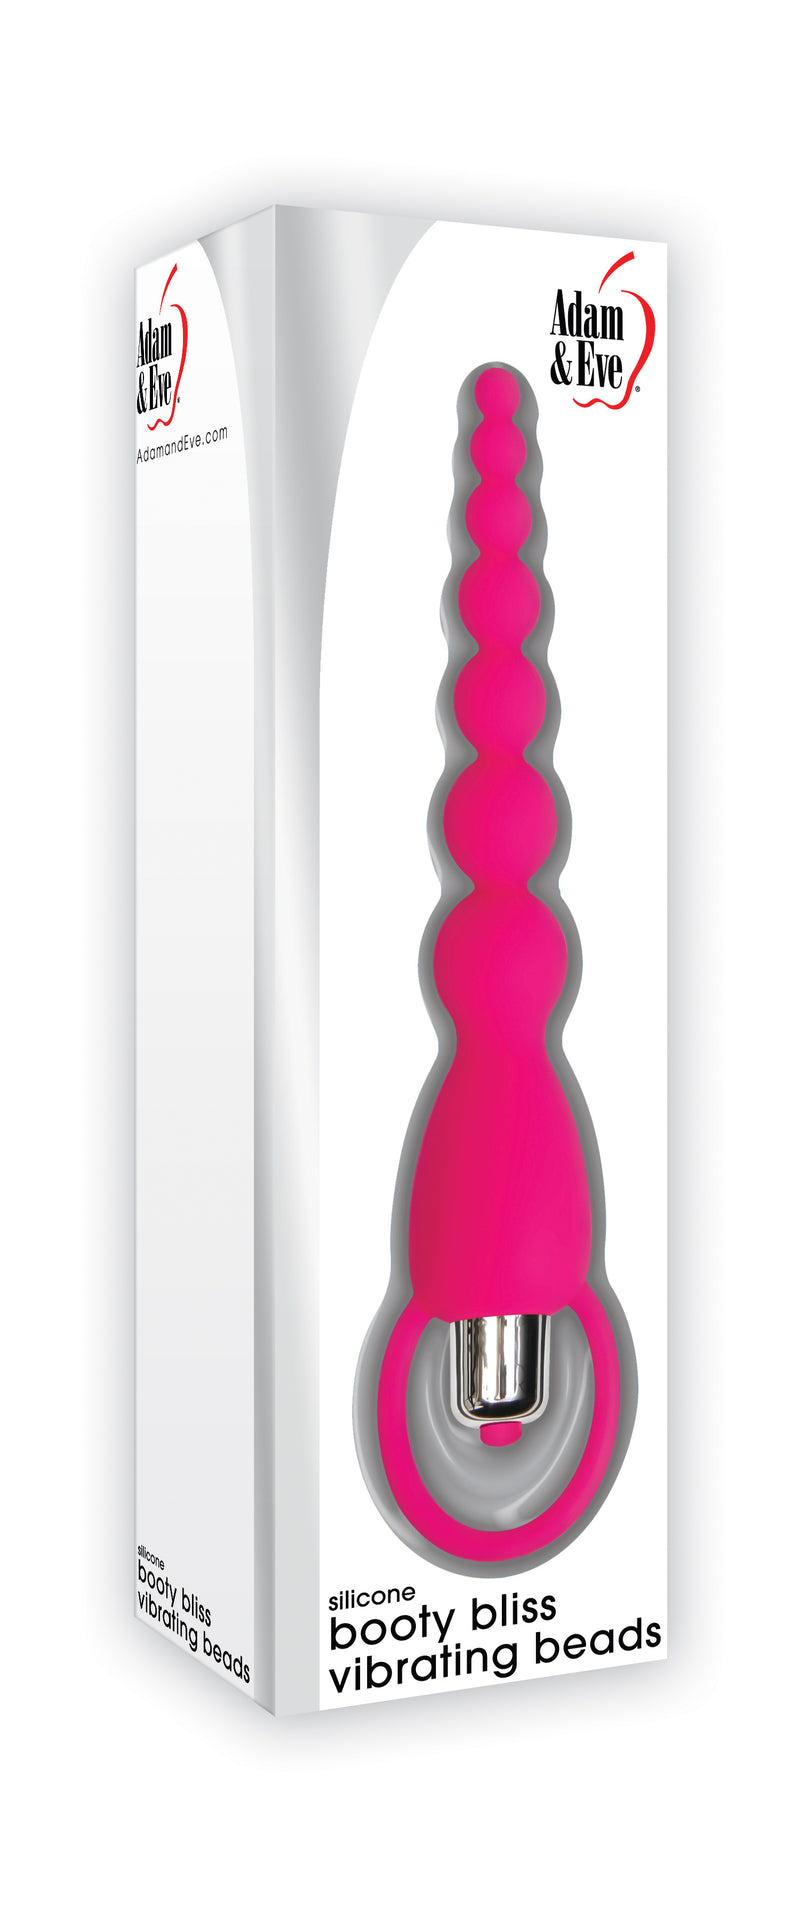 Graduated Silicone Anal Beads with Removable Vibe for Sensational Pleasure